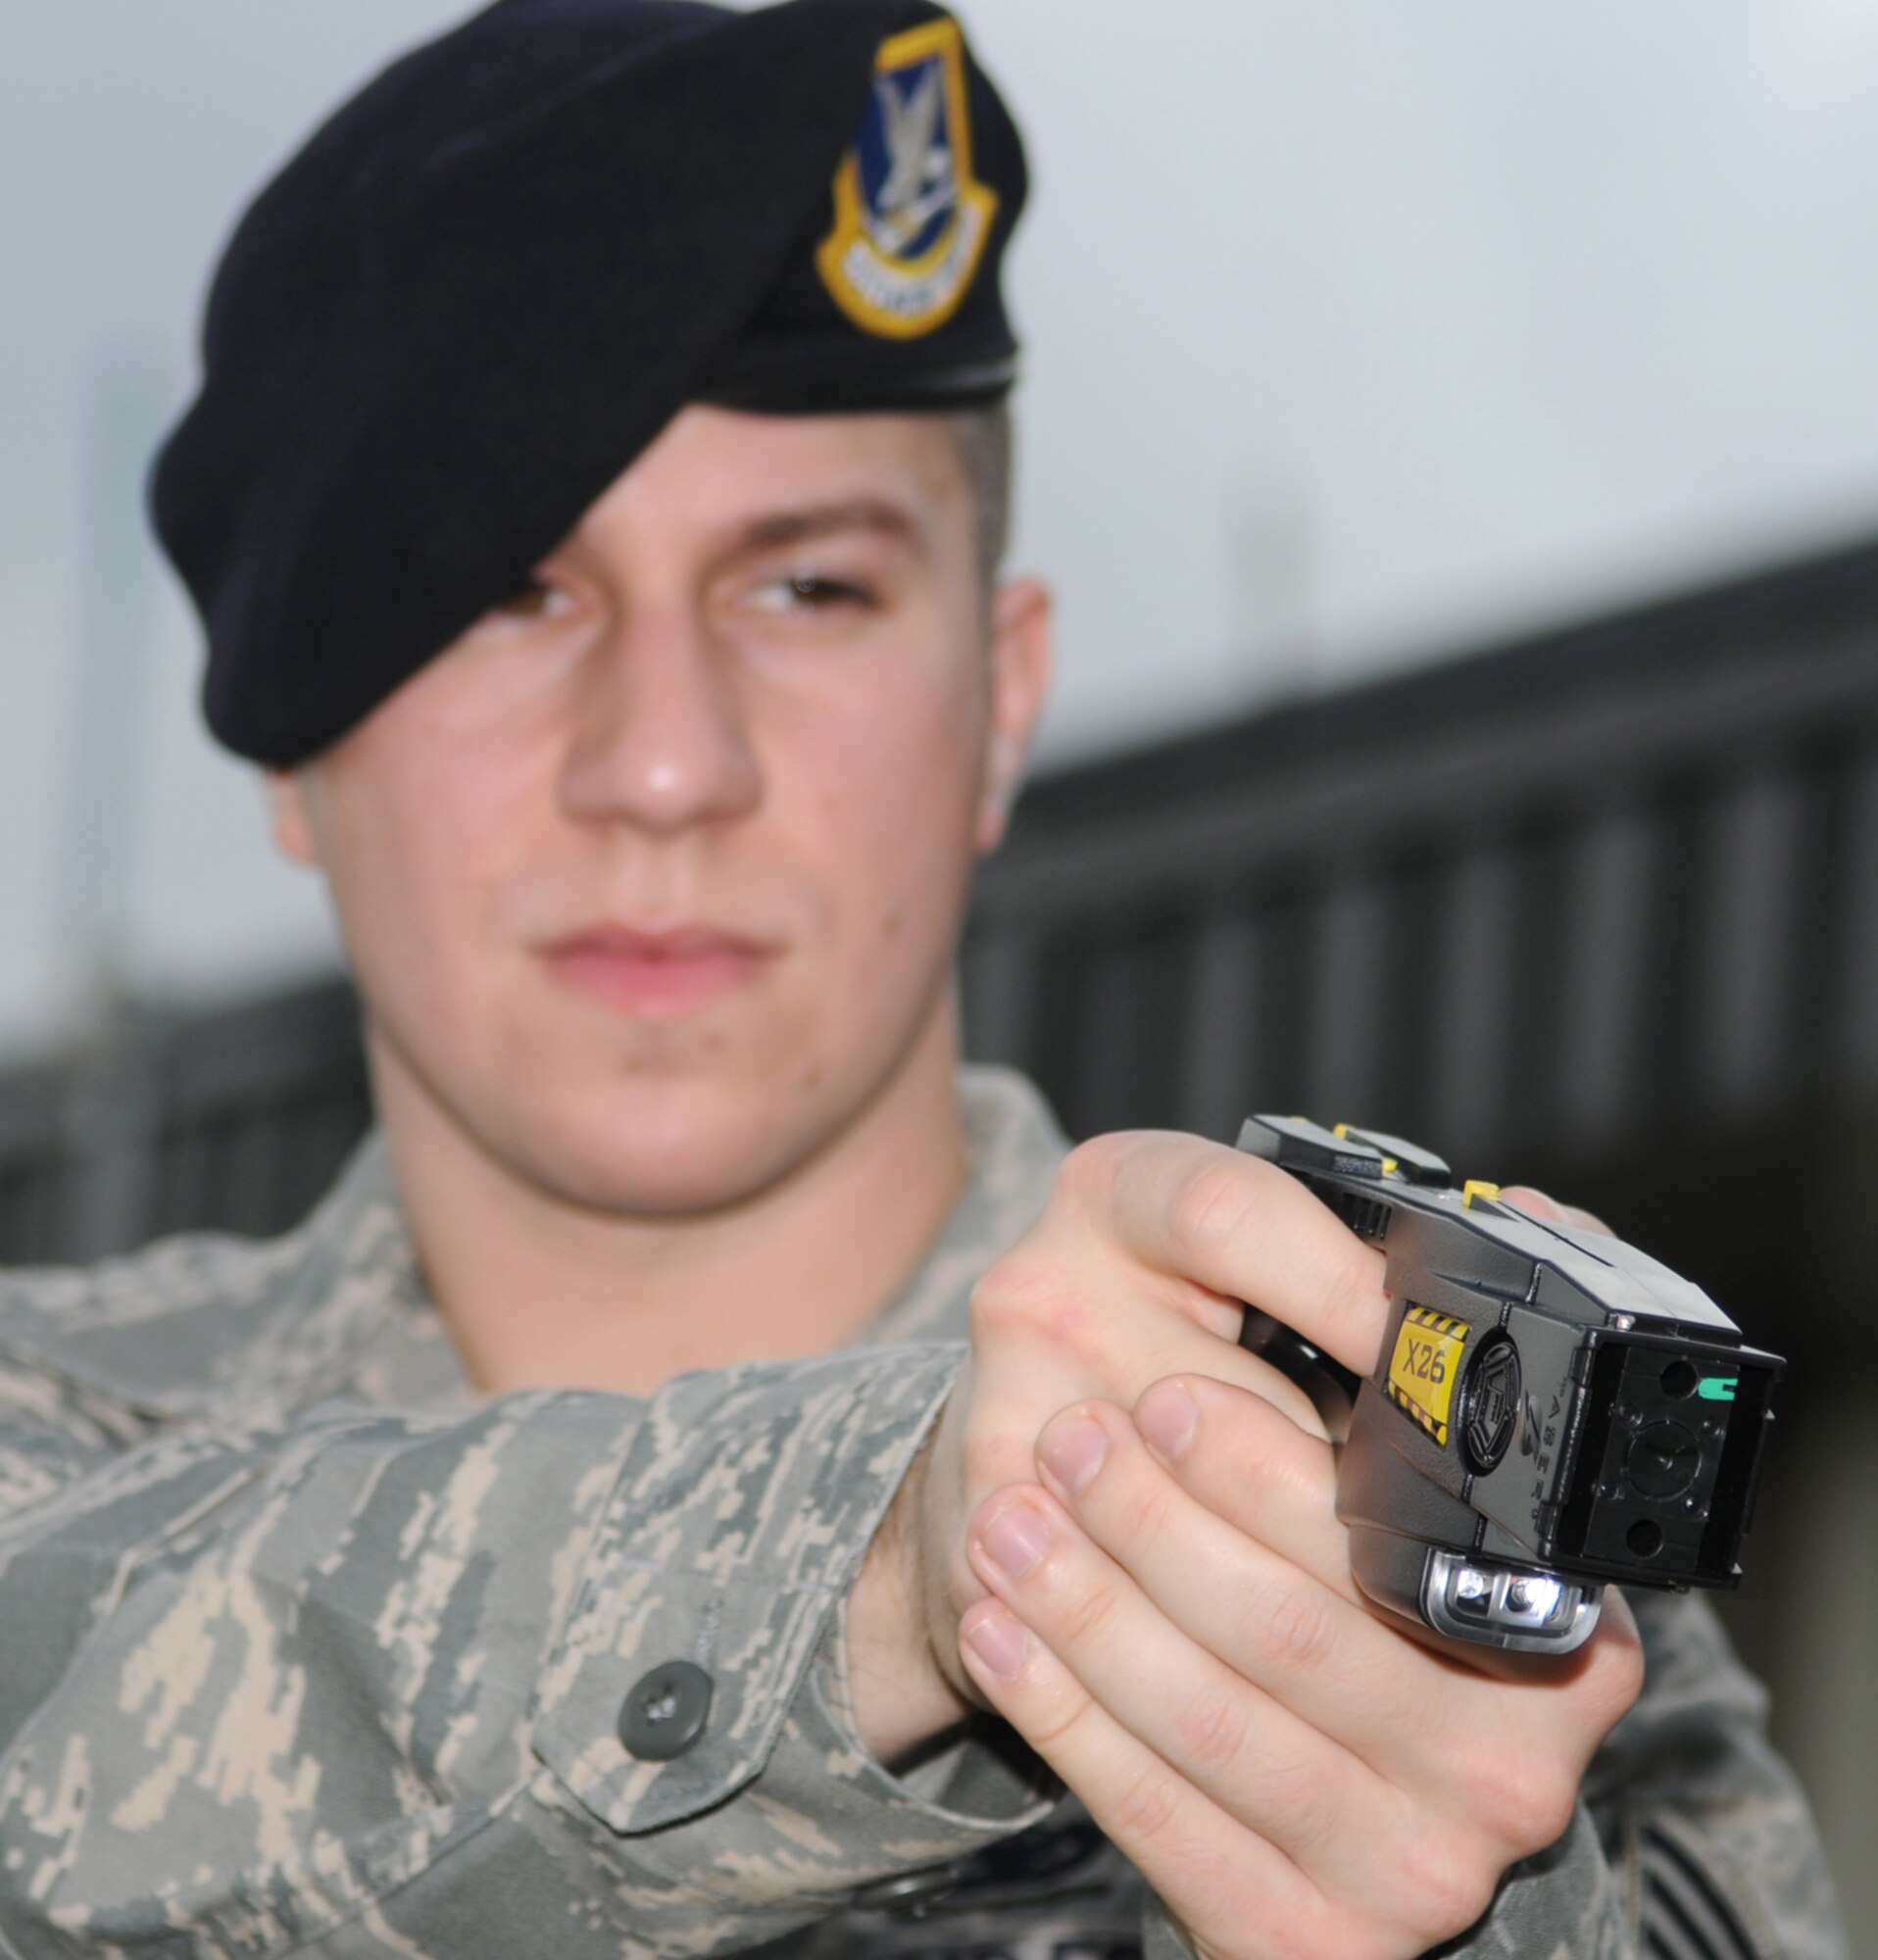 Sergeant Nadler aims a taser at a target.  (U.S. Air Force photo by Kemberly Groue)